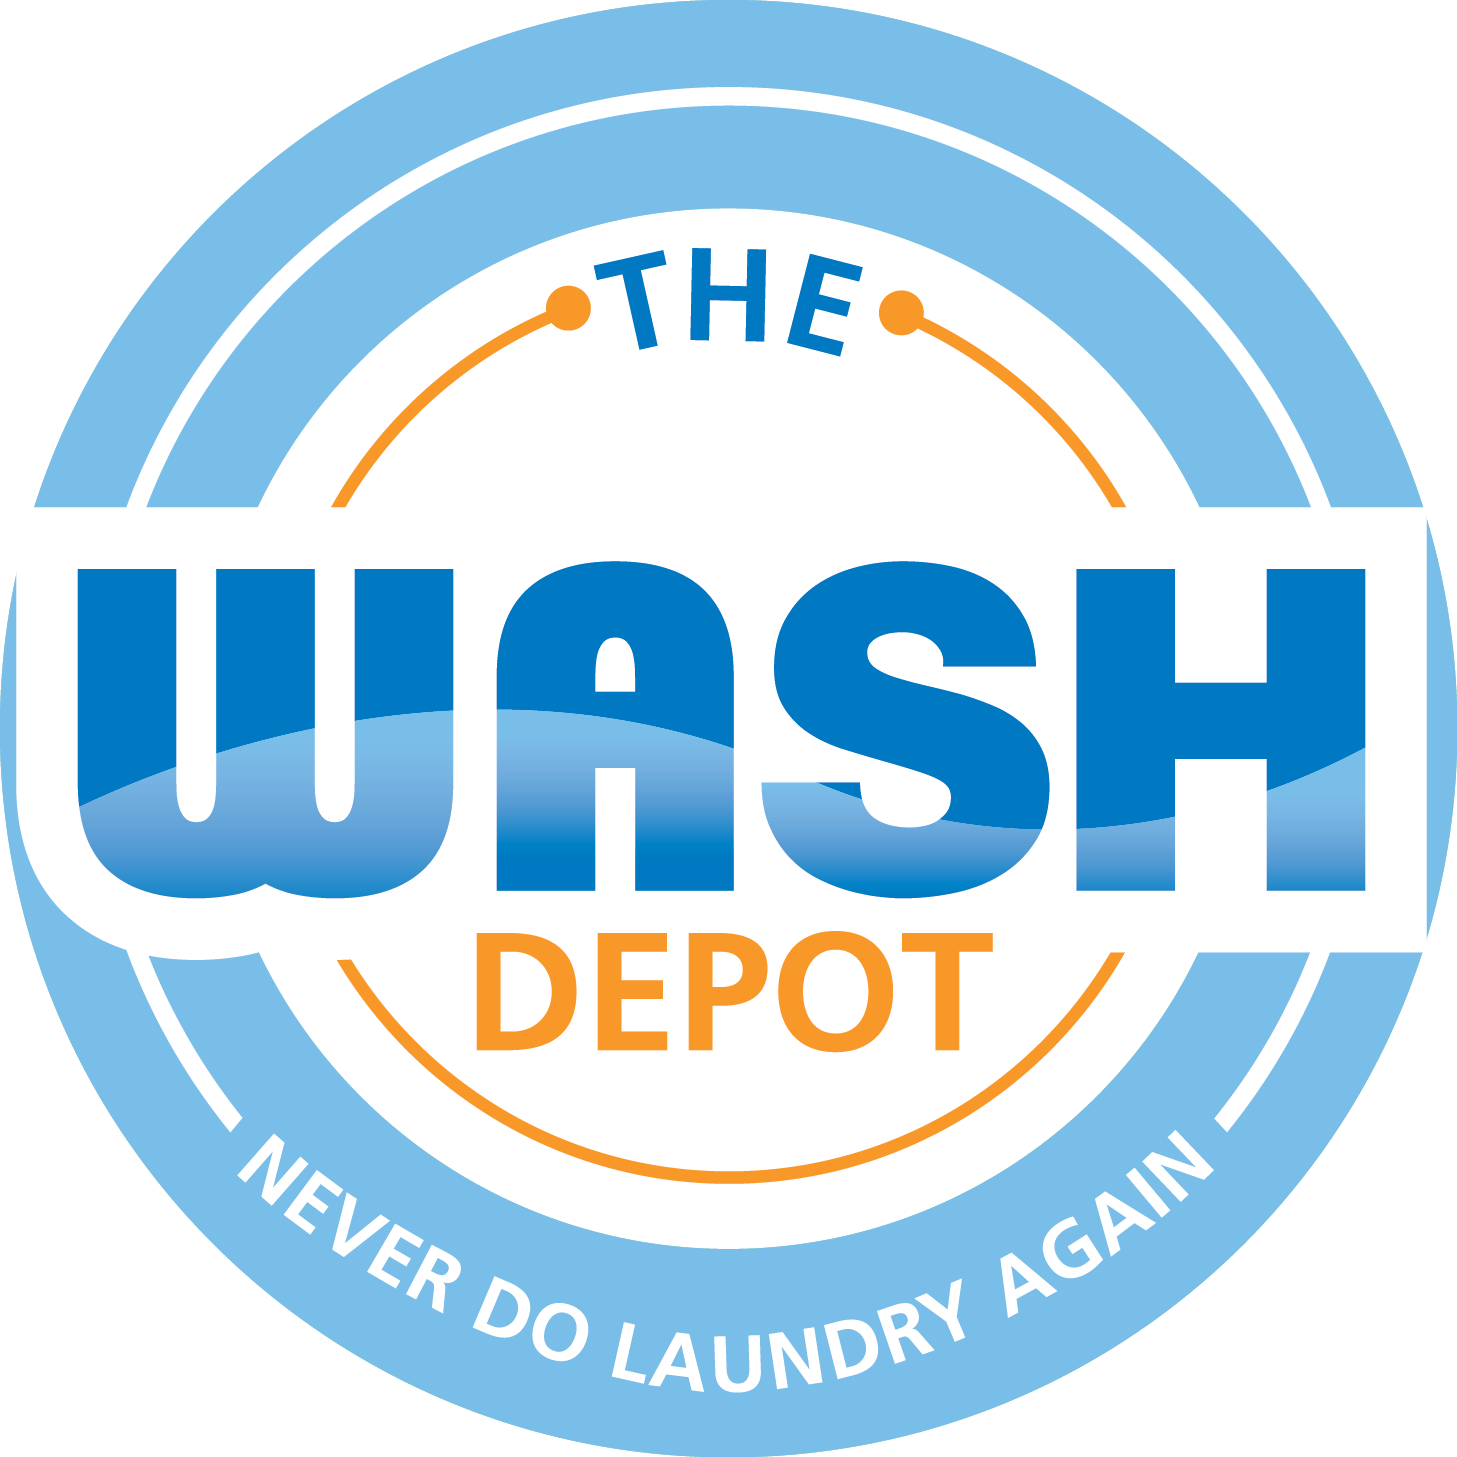 Housekeeping clipart laundry logo. Rebrand project for a